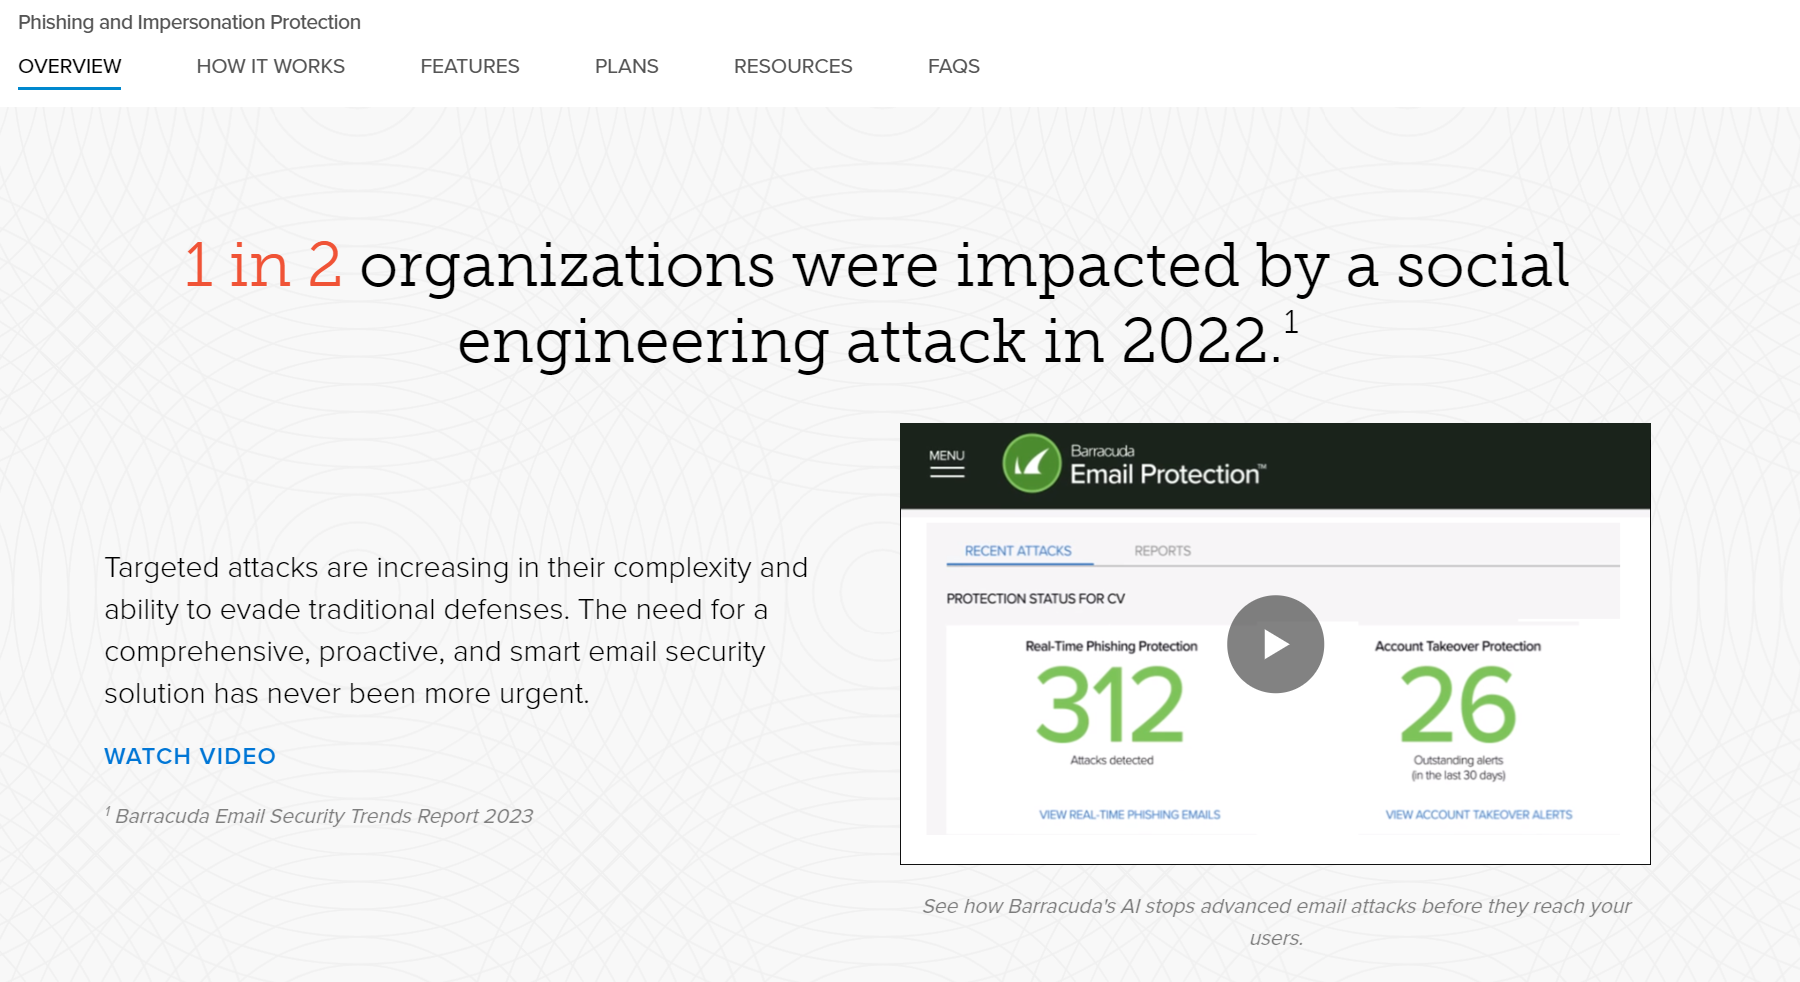 Barracuda's Phishing Proteciton landing page explains that "1 in 2 organizations were impacted by social engineering in 2022."